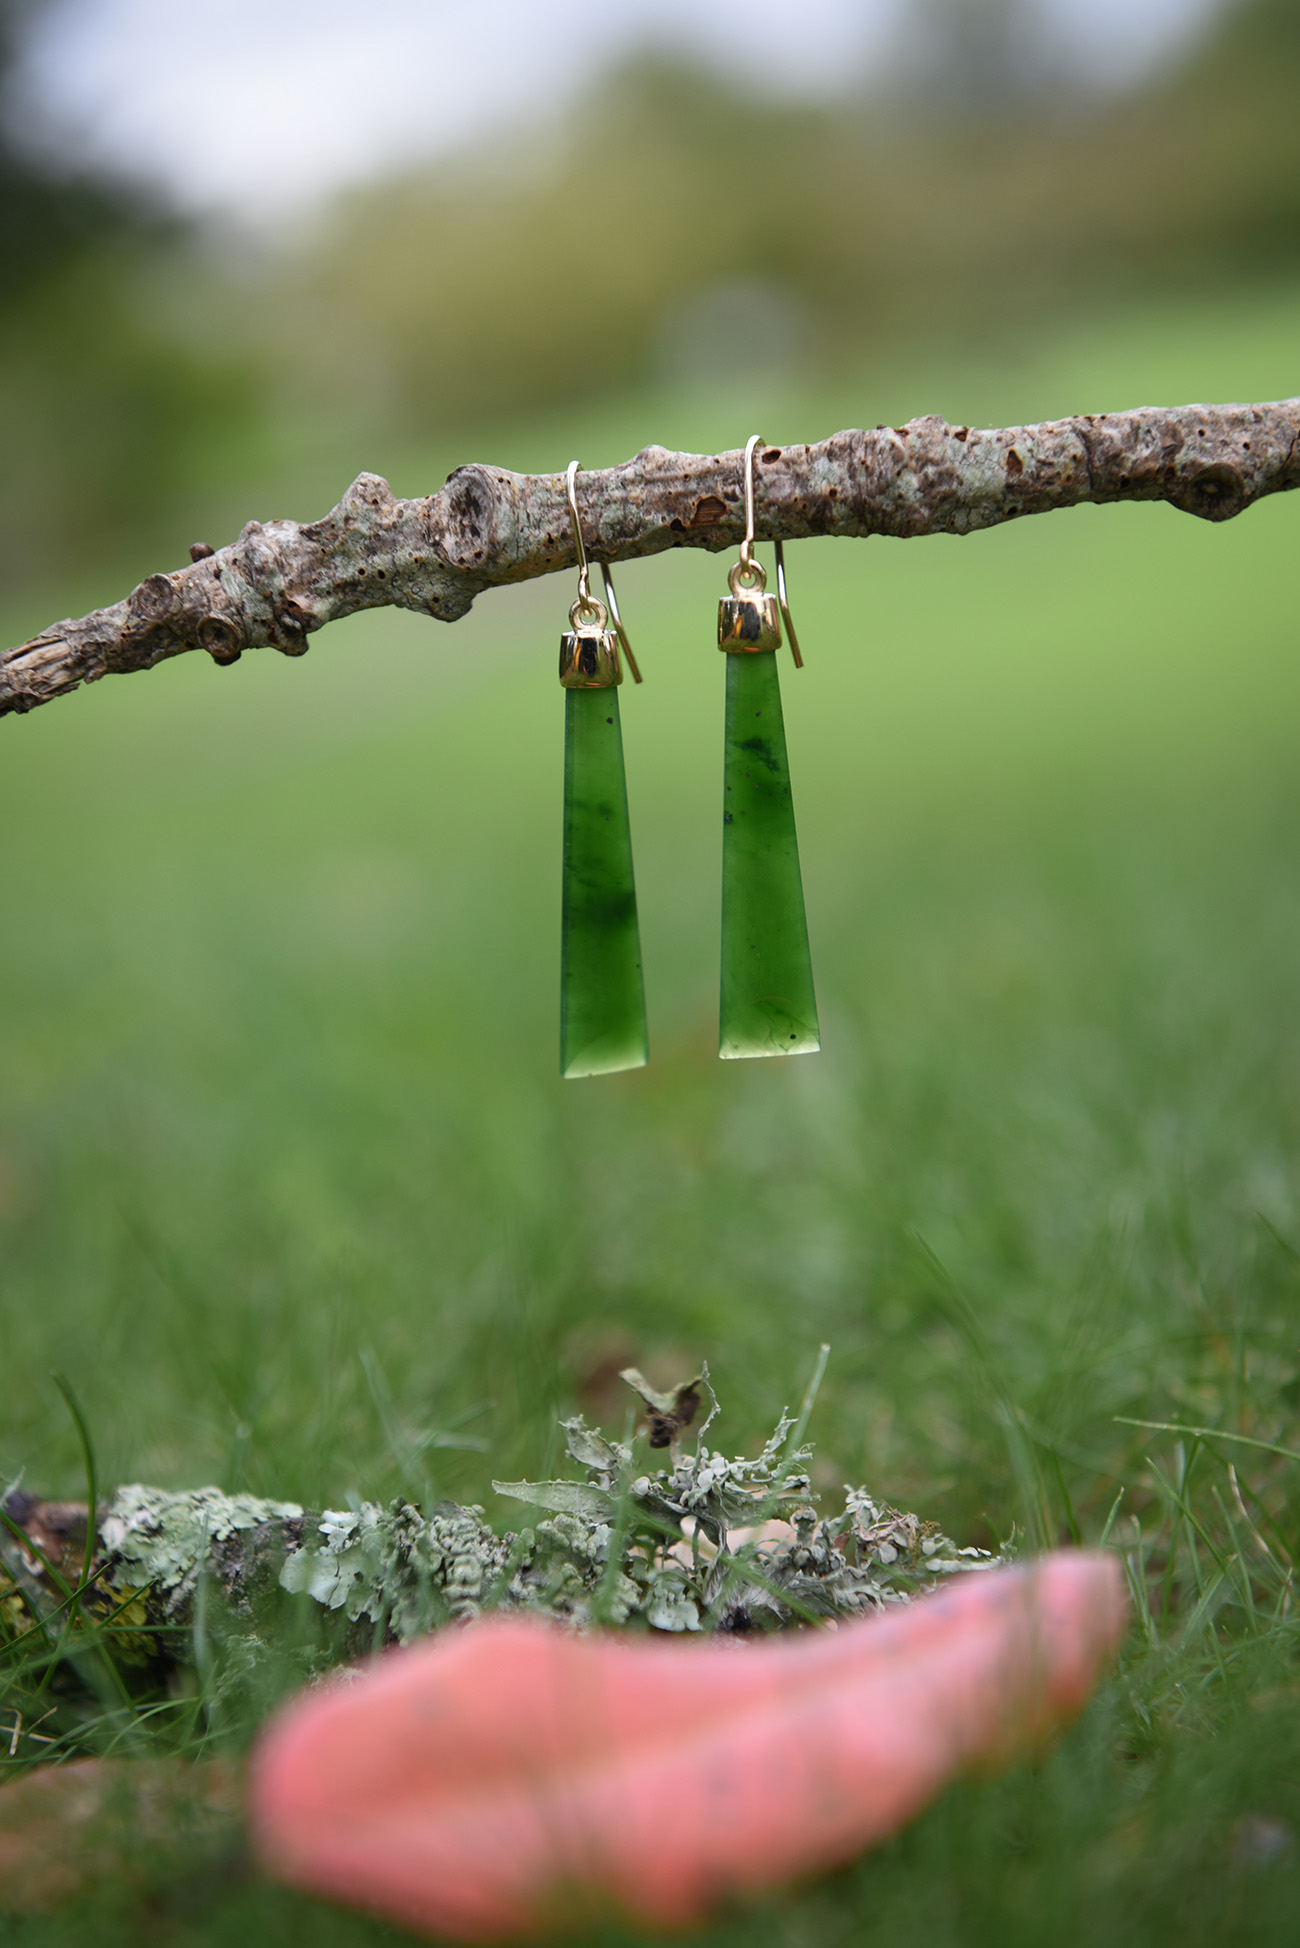 On a little branch greenstone earrings dangling with a blurred red leaf